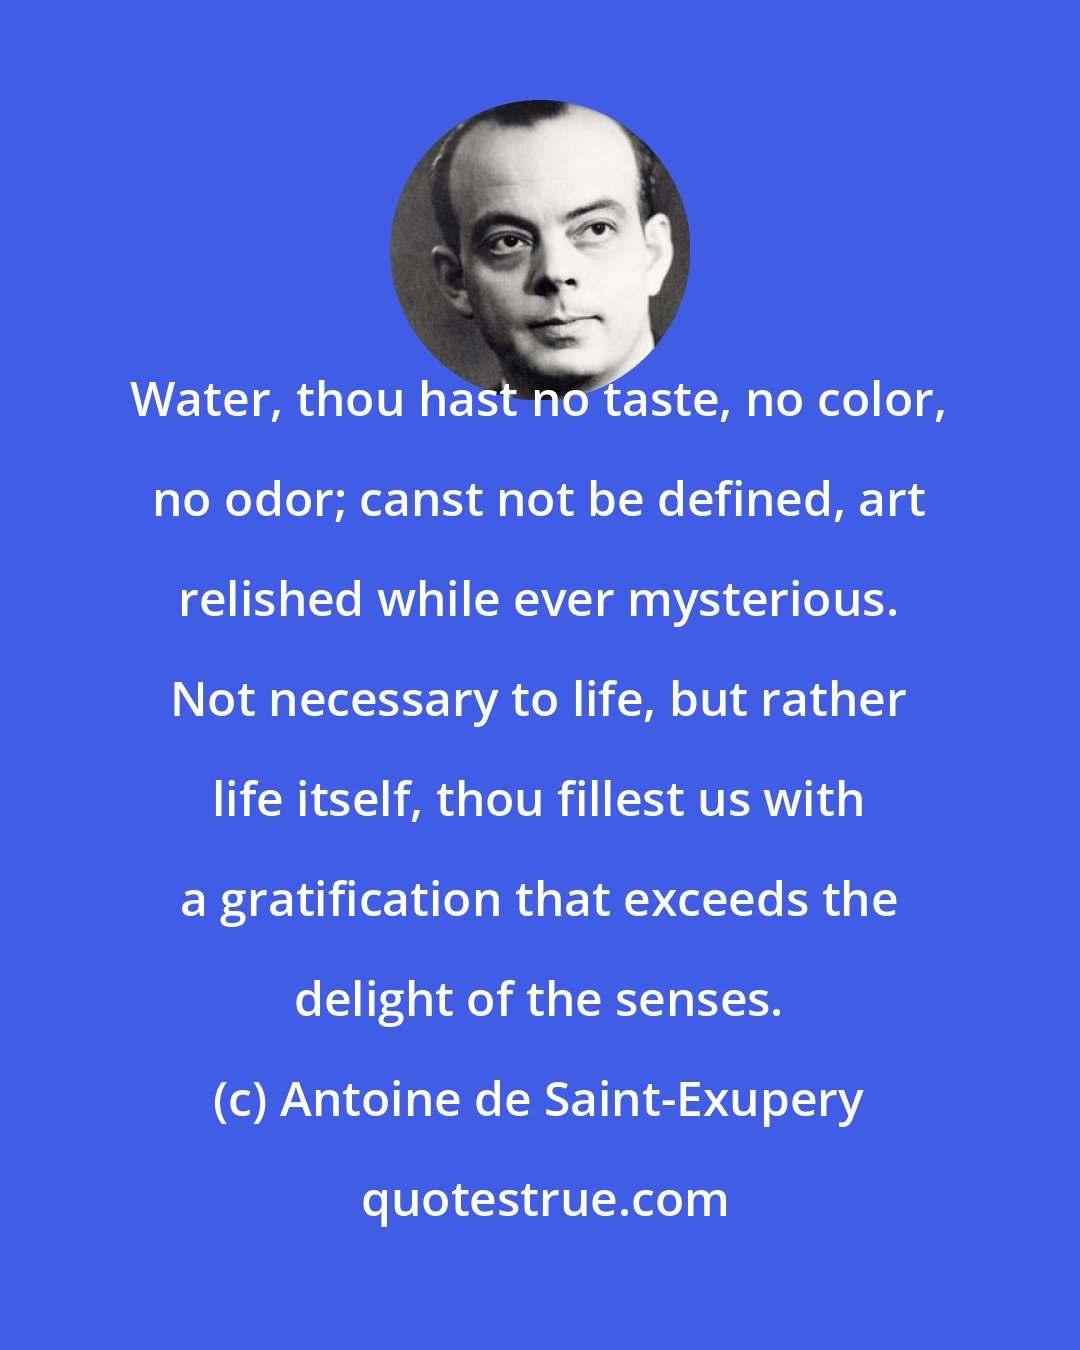 Antoine de Saint-Exupery: Water, thou hast no taste, no color, no odor; canst not be defined, art relished while ever mysterious. Not necessary to life, but rather life itself, thou fillest us with a gratification that exceeds the delight of the senses.